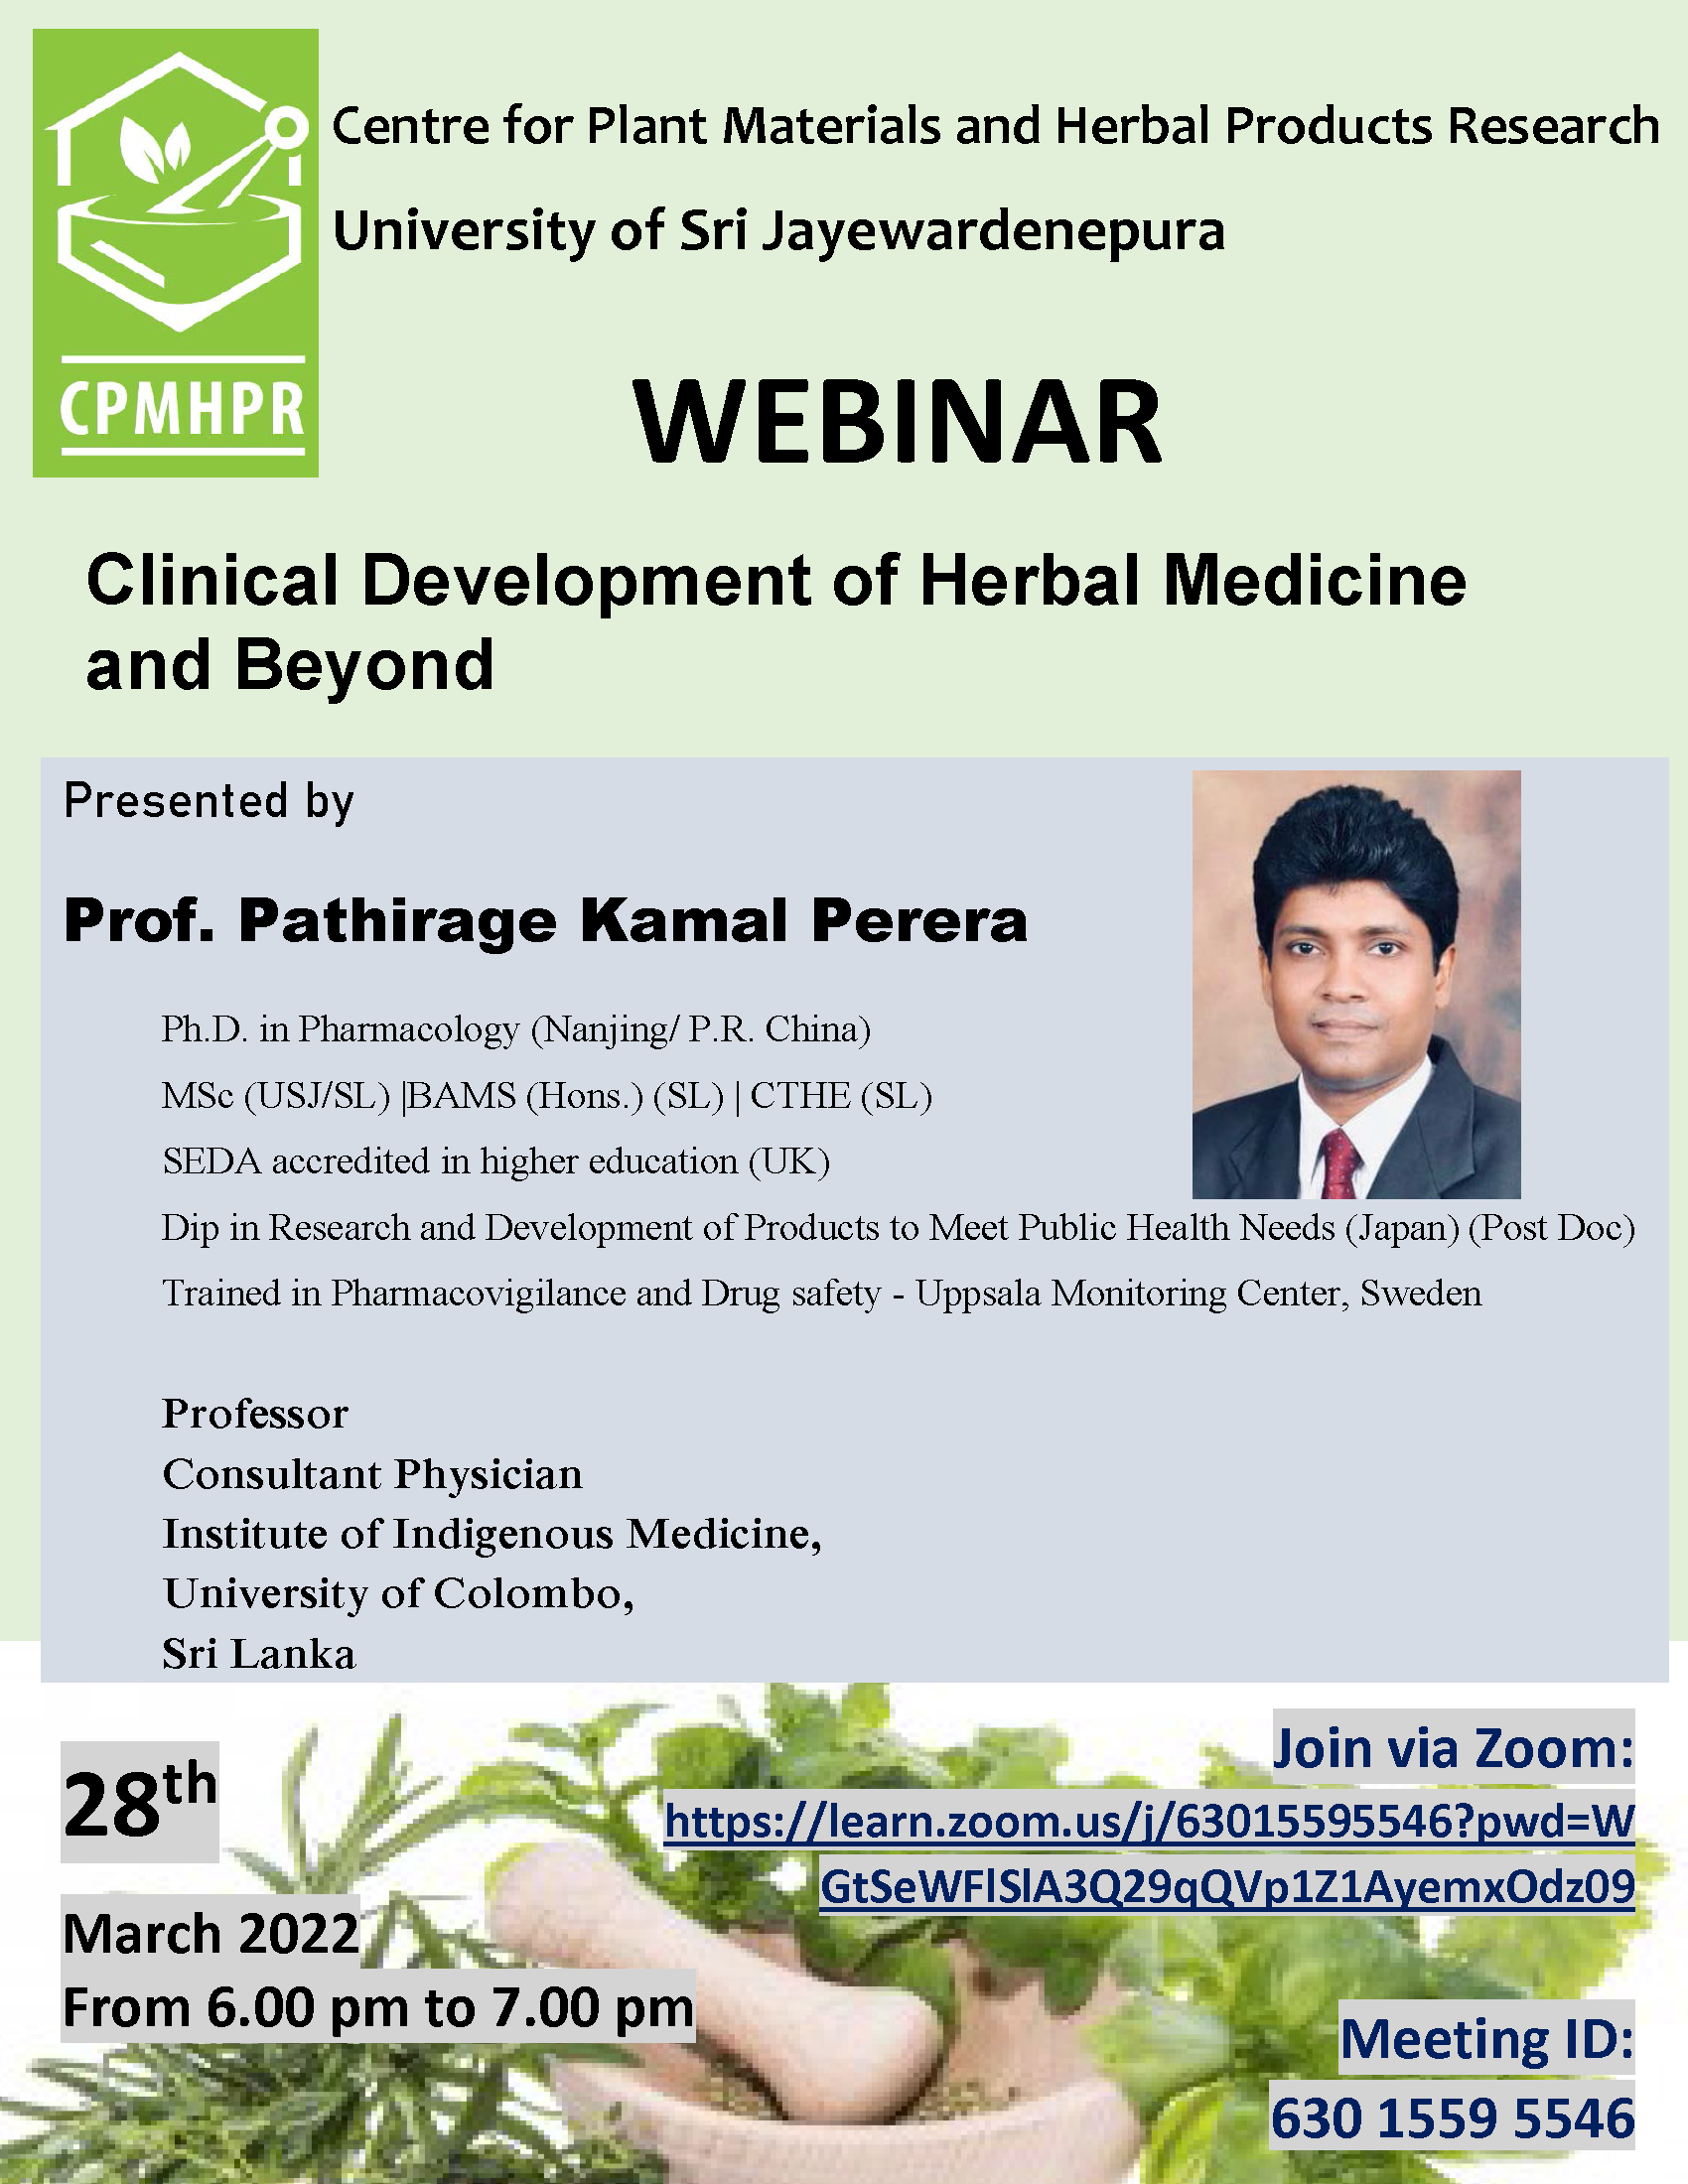 Clinical Development of Herbal Medicine and Beyond